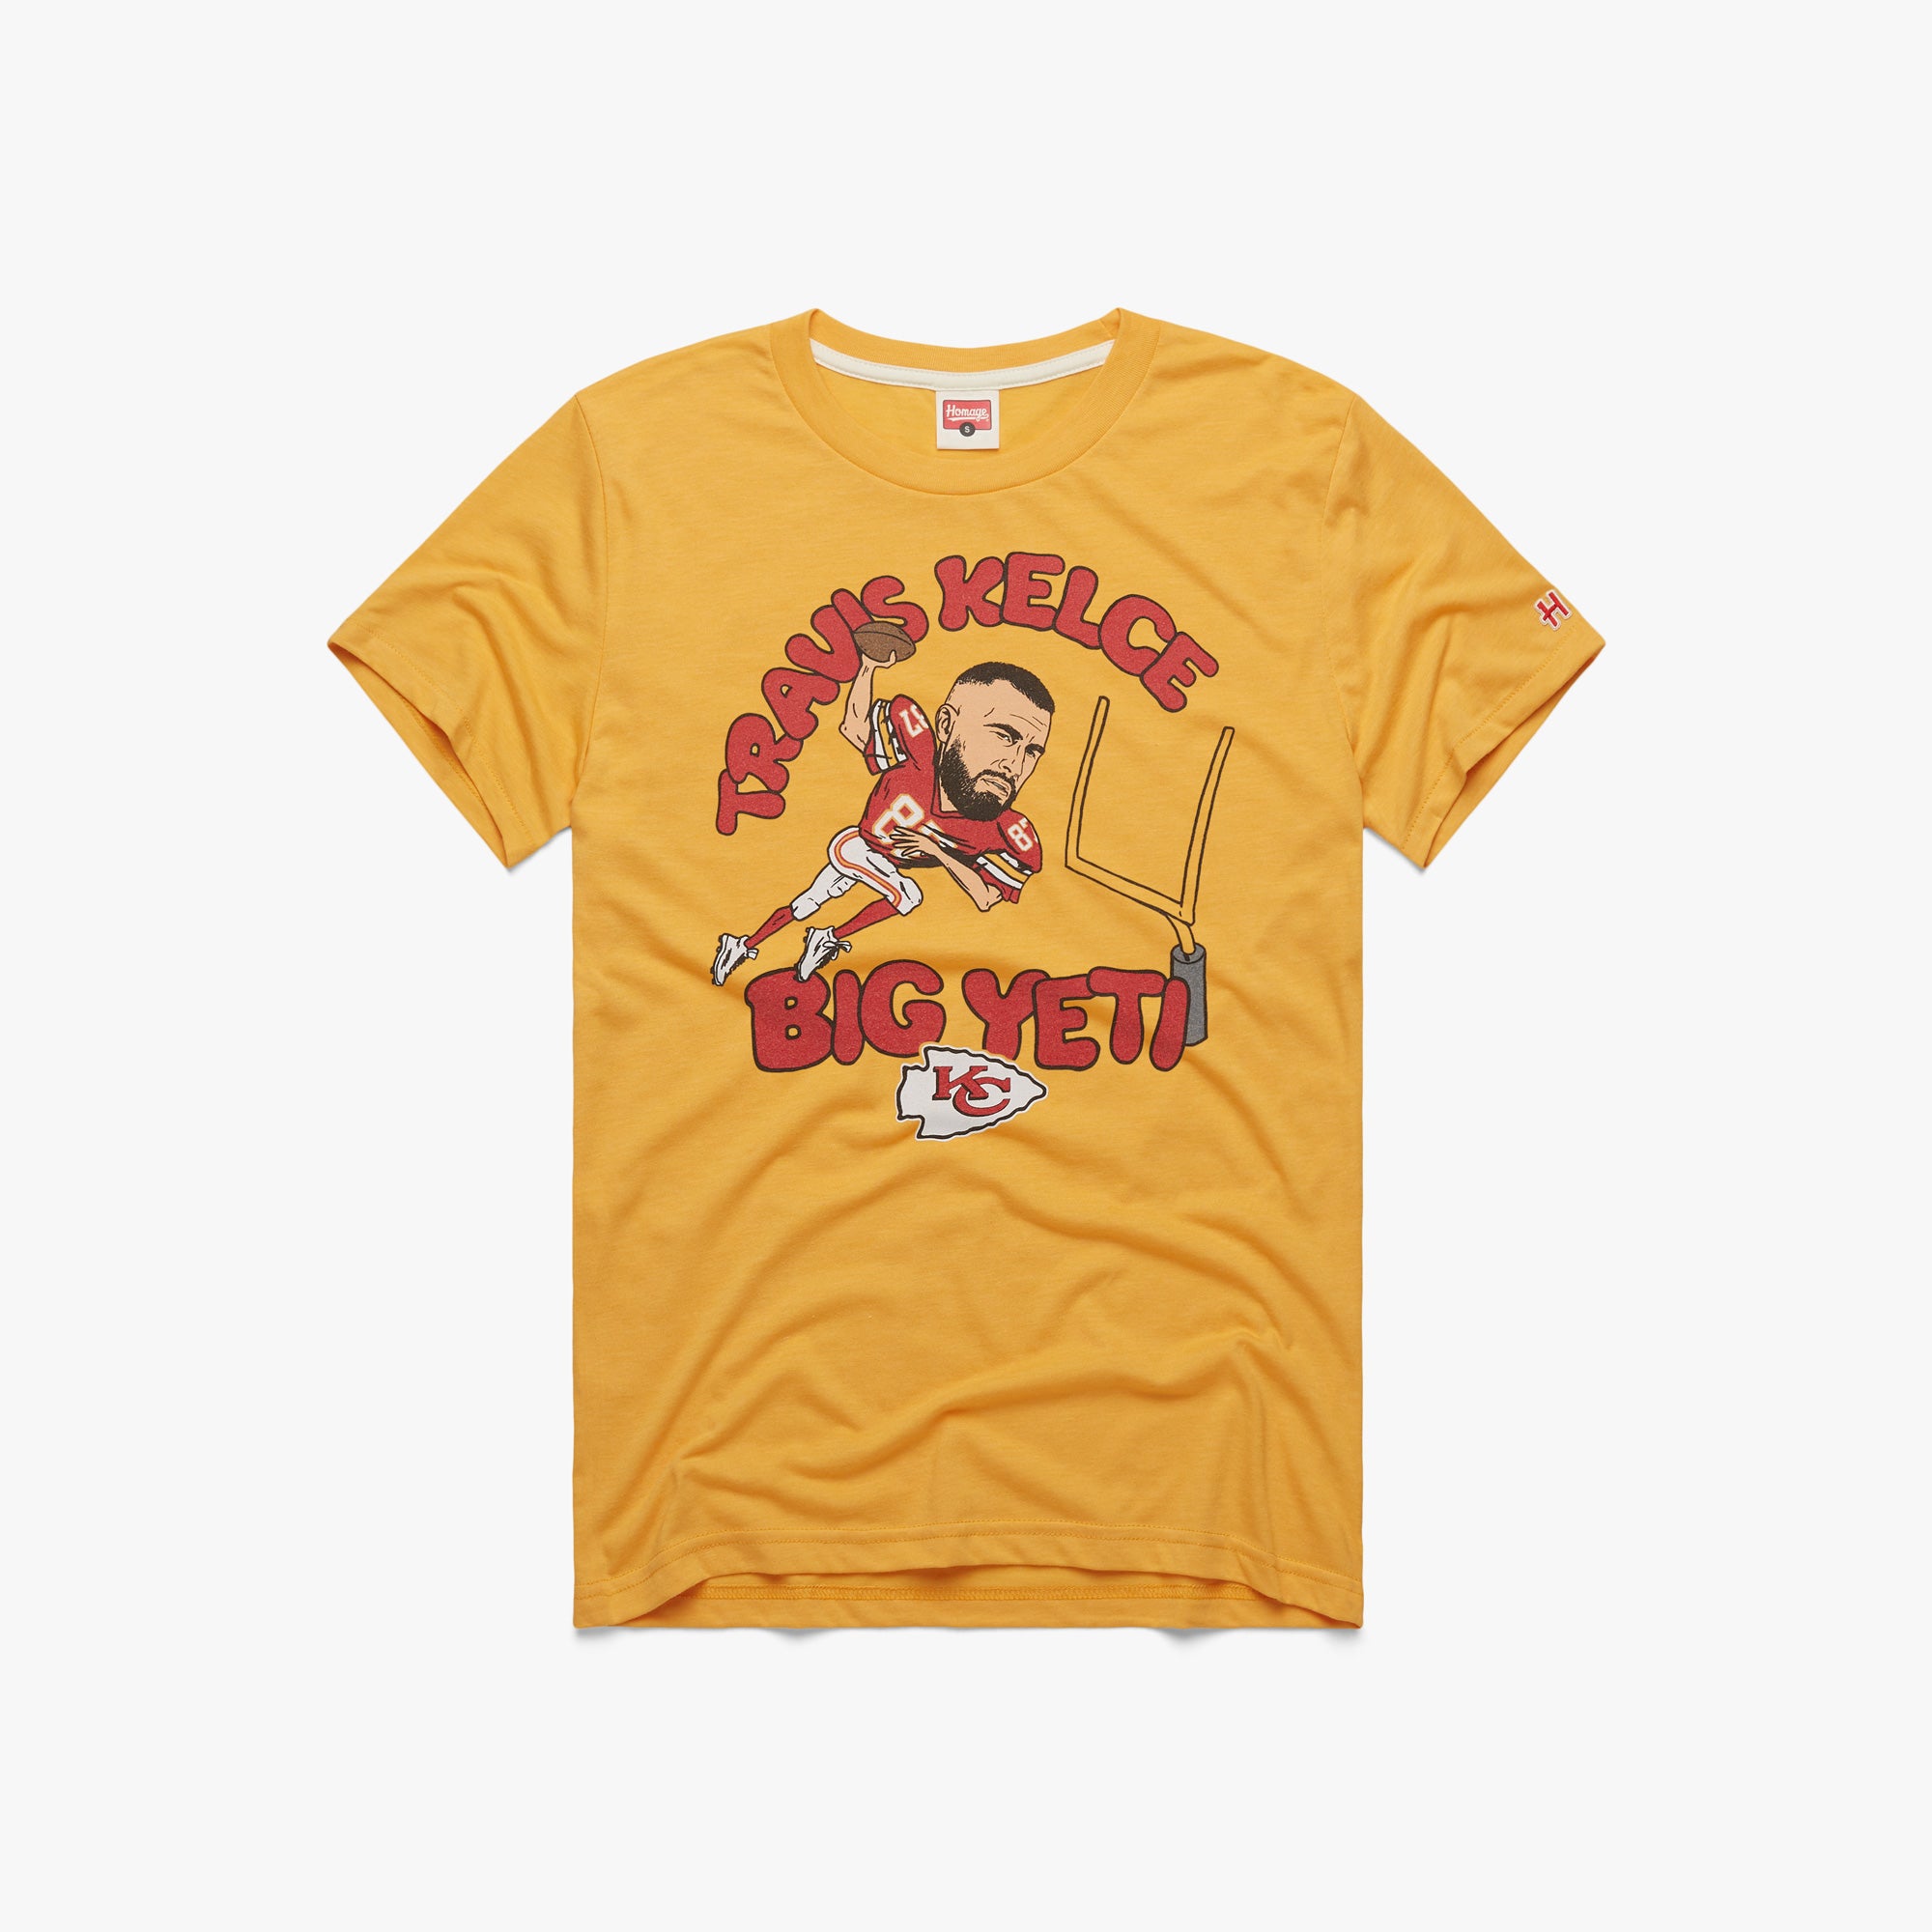 Kansas City Chiefs Travis Kelce Big Yeti T-Shirt from Homage. | Officially Licensed Vintage NFL Apparel from Homage Pro Shop.